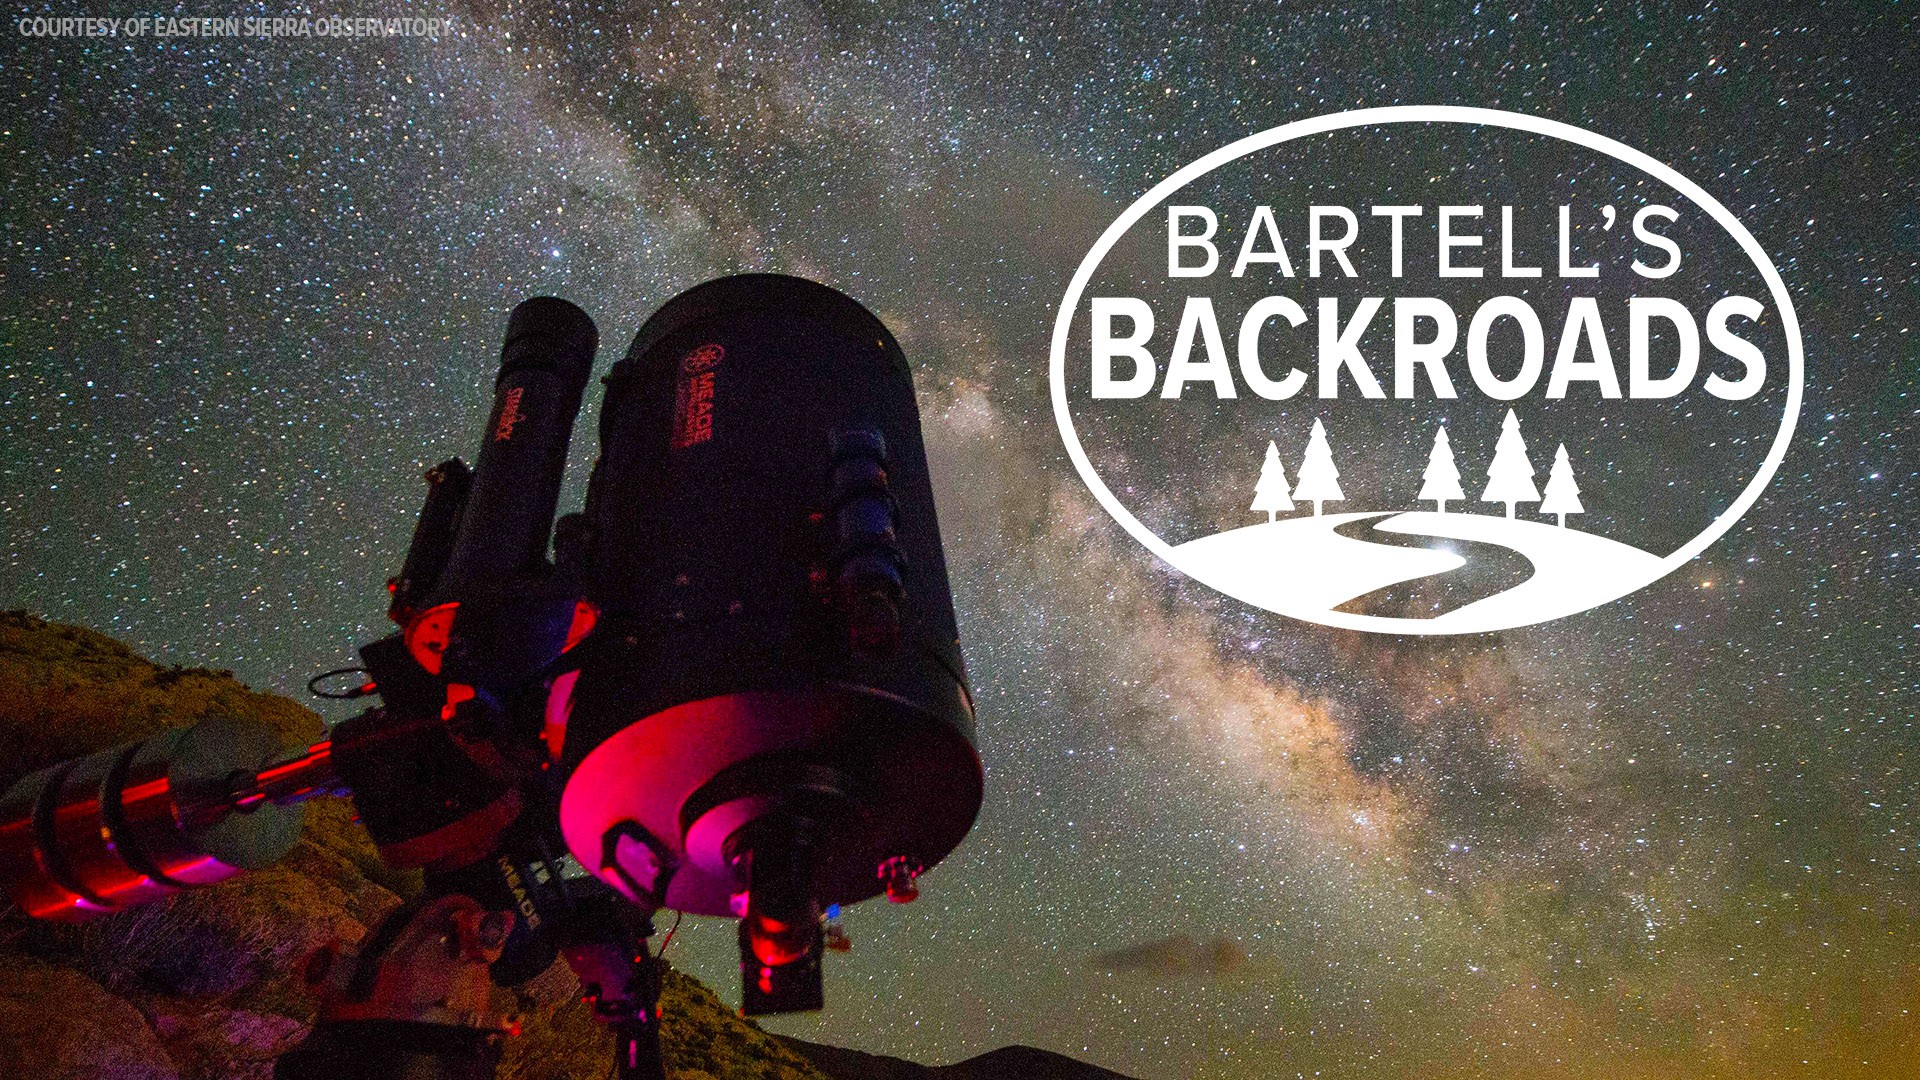 June, Jupiter and a journey. Bartell takes us on the backroads to find the best place to go stargazing.